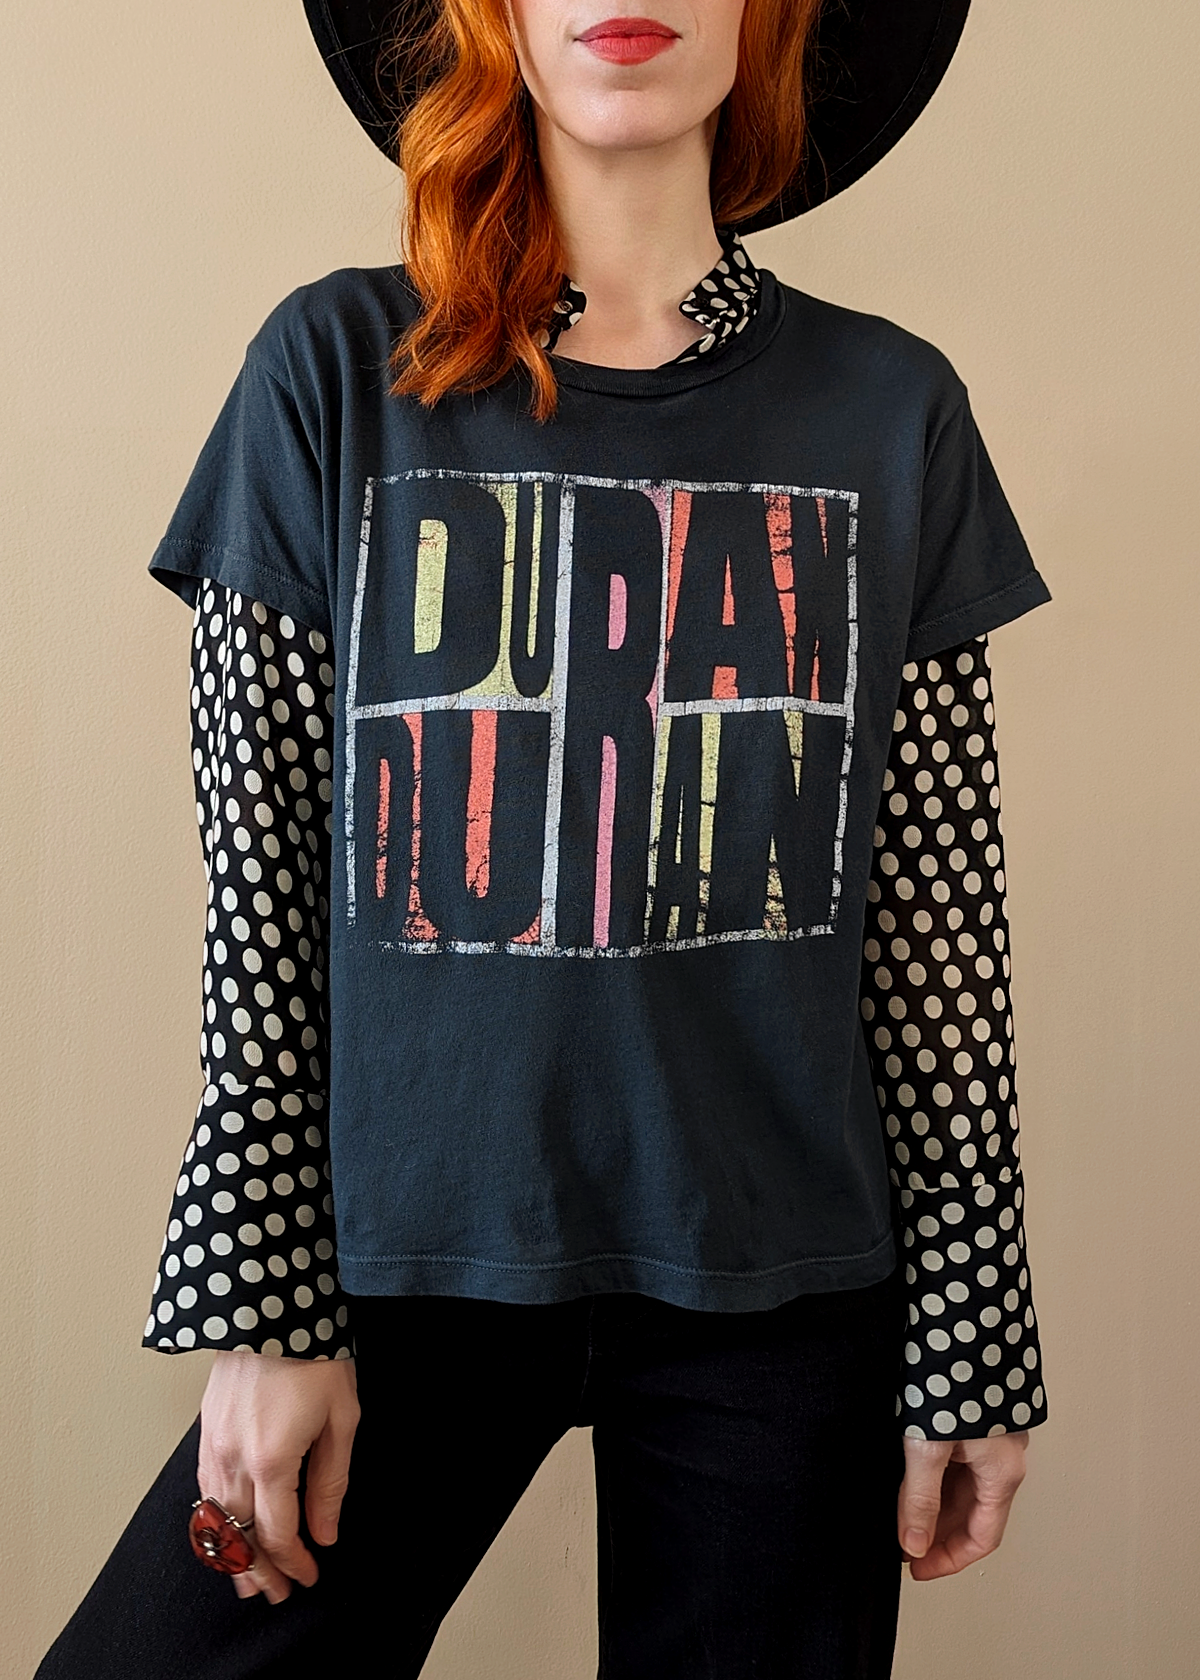 Duran Duran Big Thing Abstract Idealist Romantic Tee by Daydreamer LA Made in USA officially licensed 